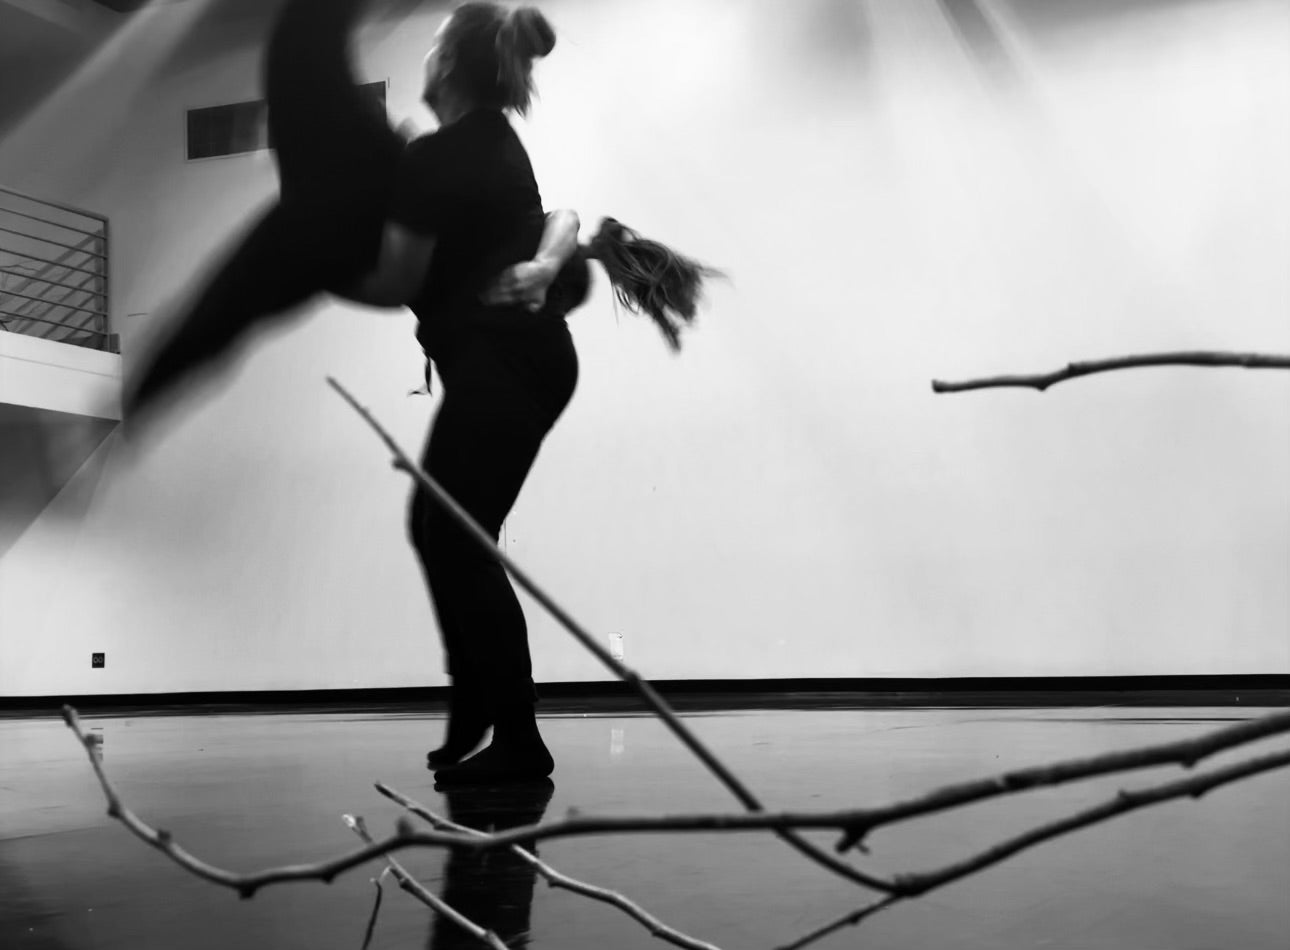 Nicole is supporting her dance partner in this black and white photography. Nicole stands facing the right side of the room as her partner, Zarina, swings her legs horizontally across Nicole's trunk. Zarina's legs split and are reaching past the frame of the photo. A barren tree branch lies on the floor in the foreground of the photograph taken by Haley Wilcox.